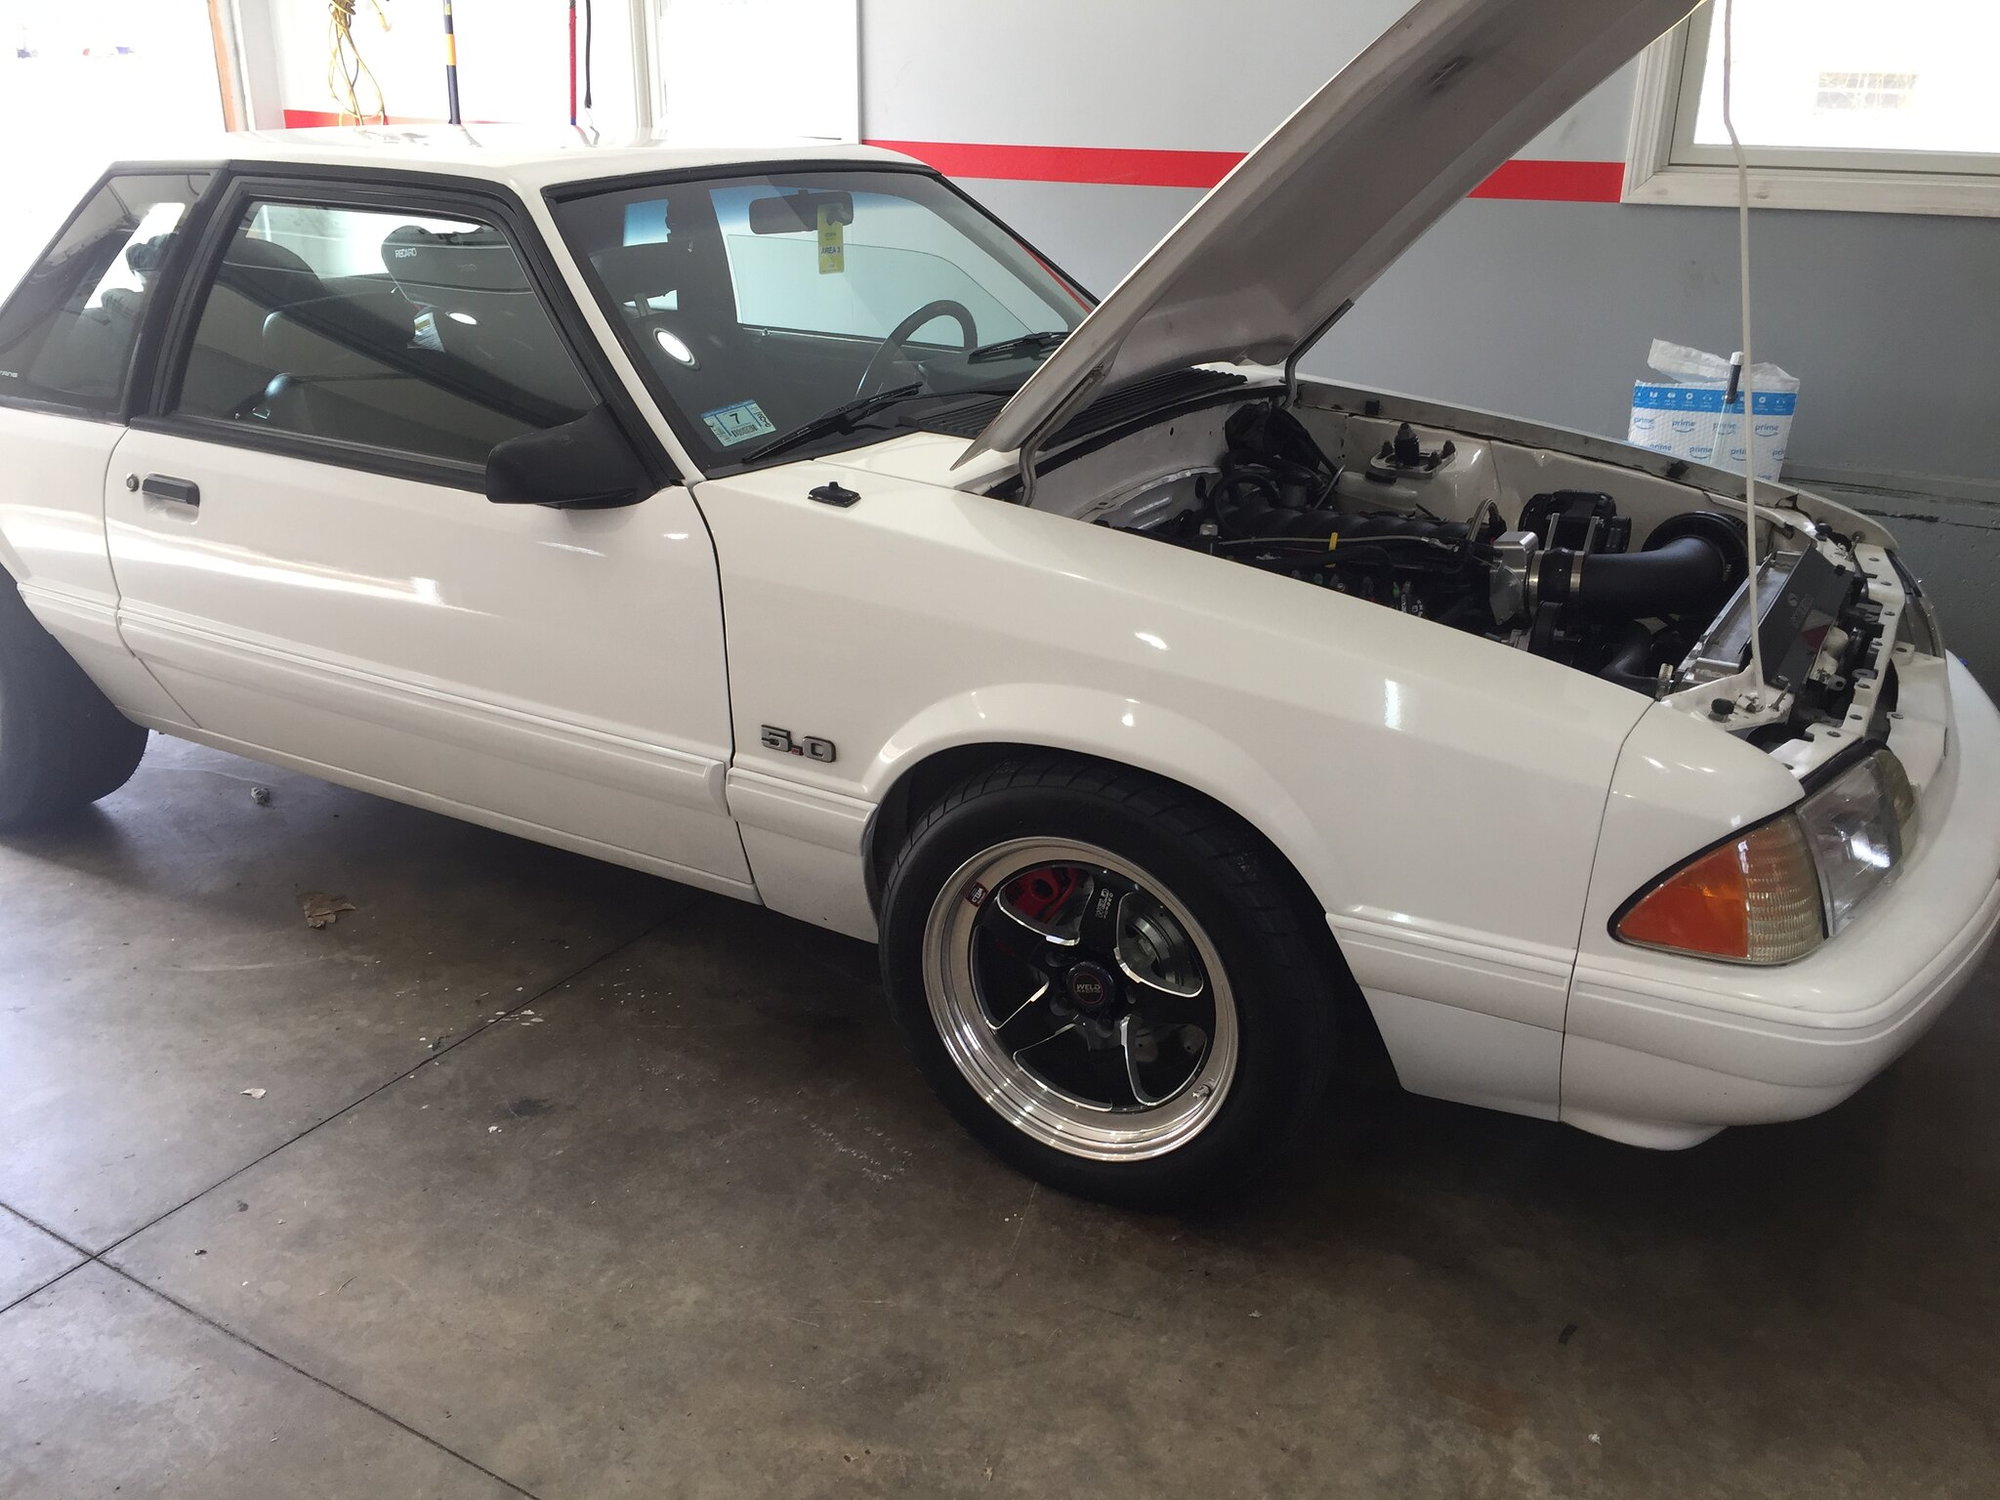 1993 Ford Mustang - F/S: LS notch back foxbody mustang - Used - VIN 1facp40e3pf196945 - 8 cyl - 2WD - Manual - Coupe - White - Plainville, CT 06062, United States